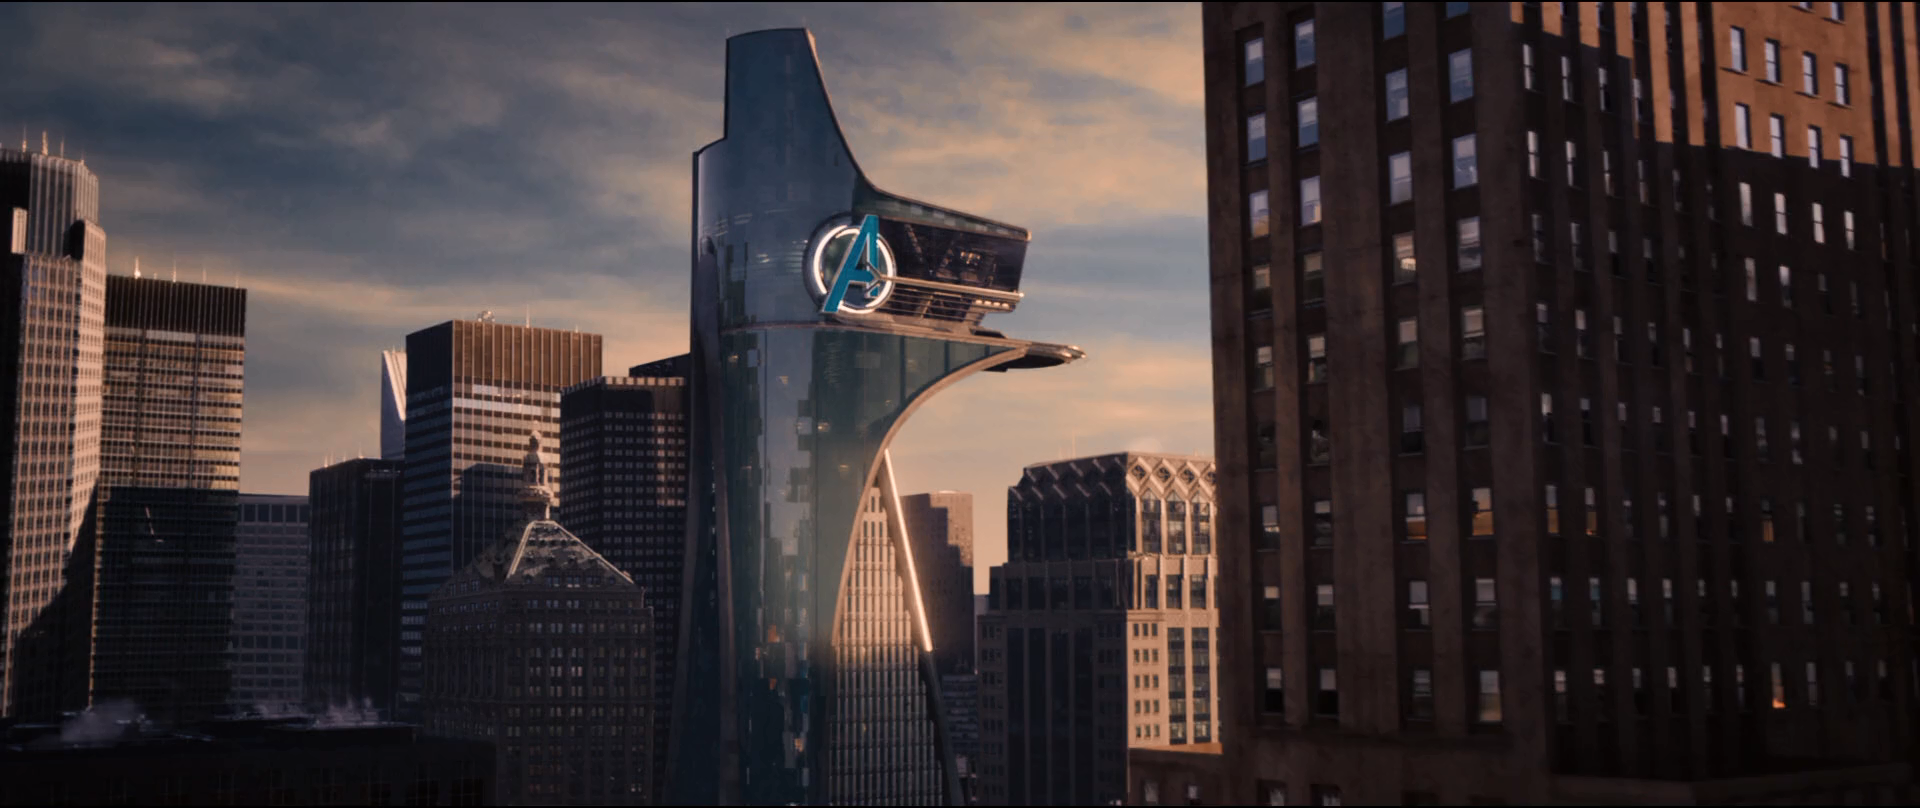 Avengers Tower, Marvel Cinematic Universe Wiki